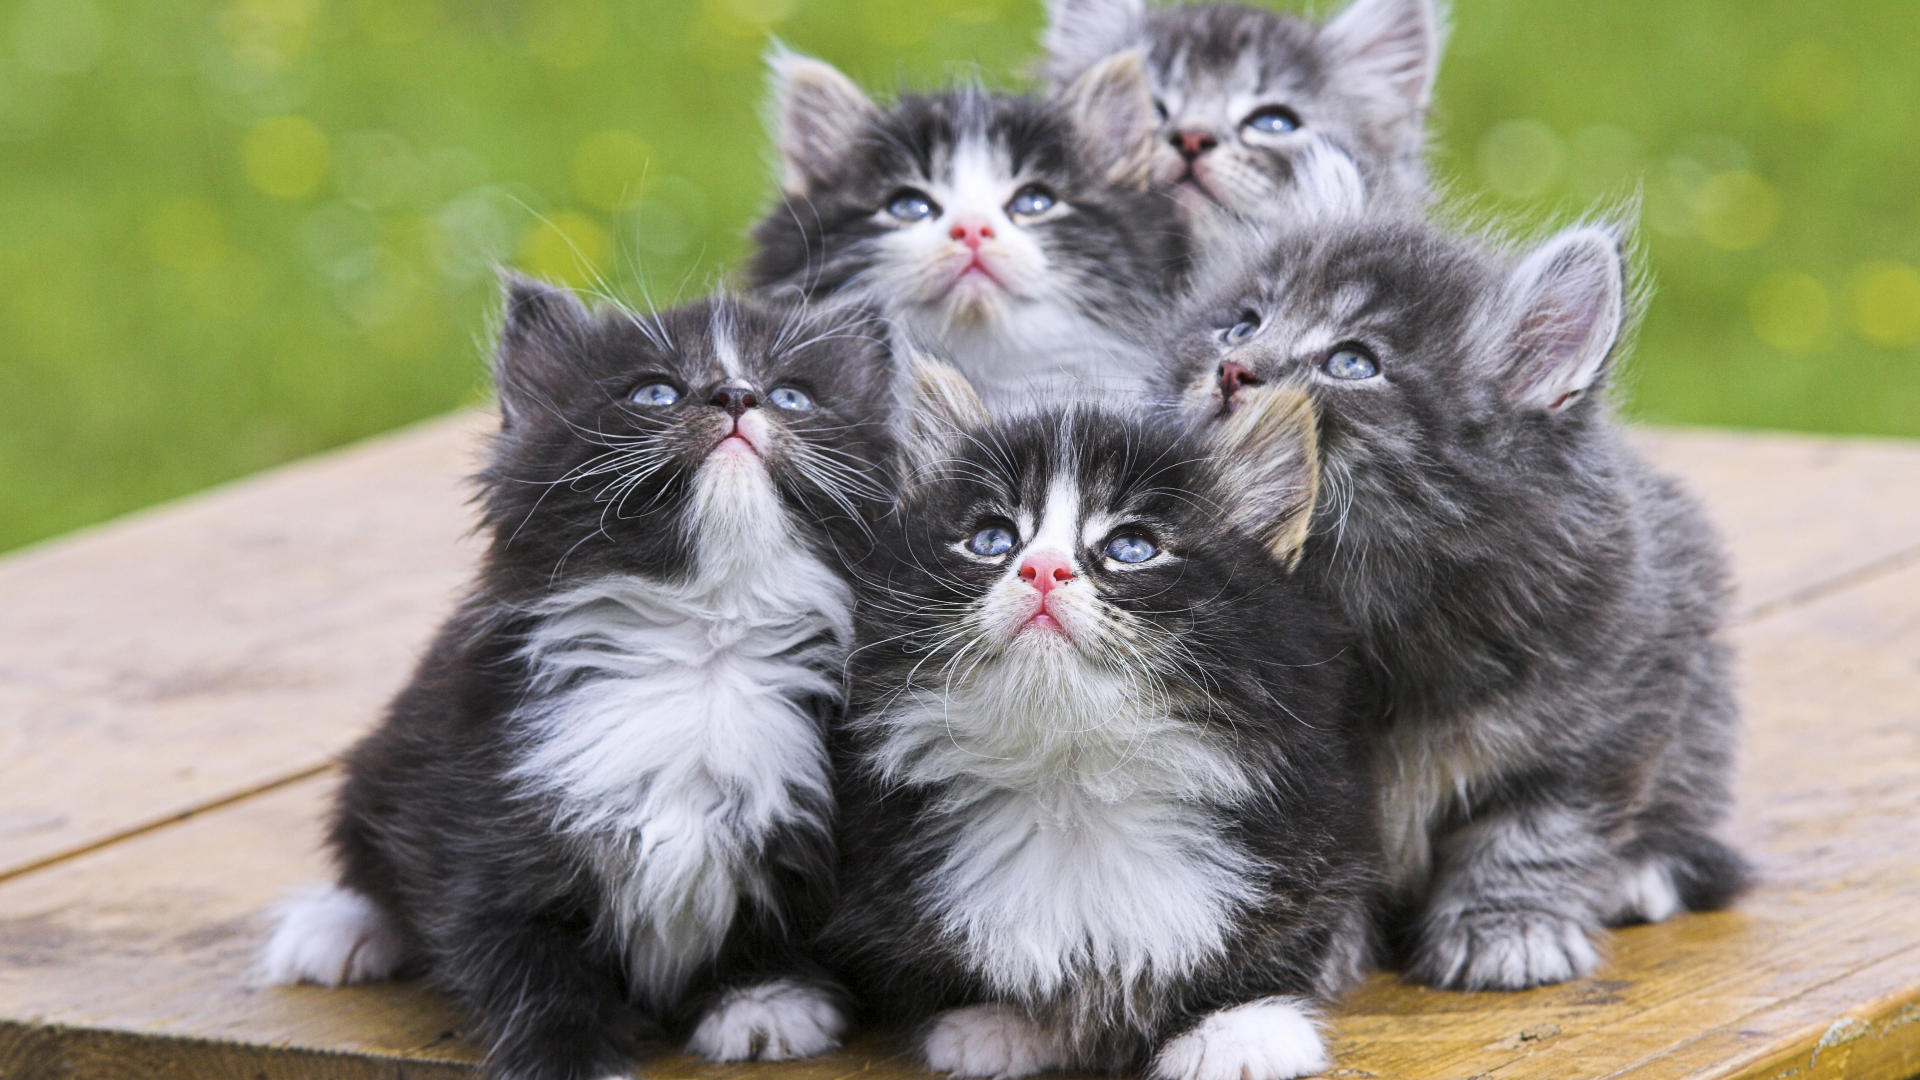 Kittens HD Wallpaper And Make This For Your Desktop Tablet